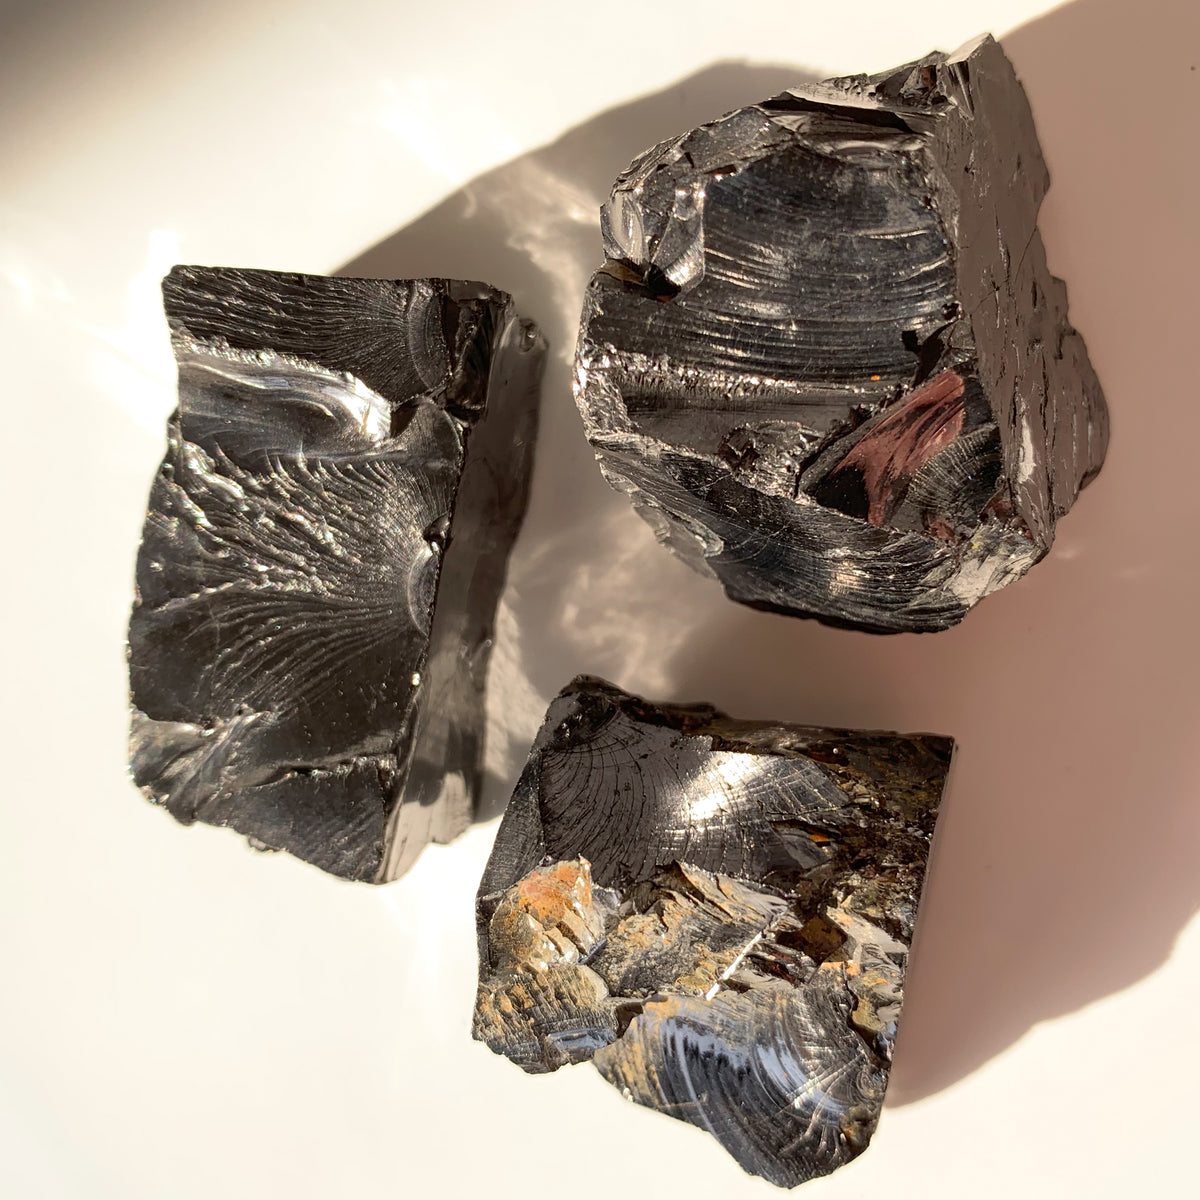 Elite Shungite Water Stones for Purification and Healing